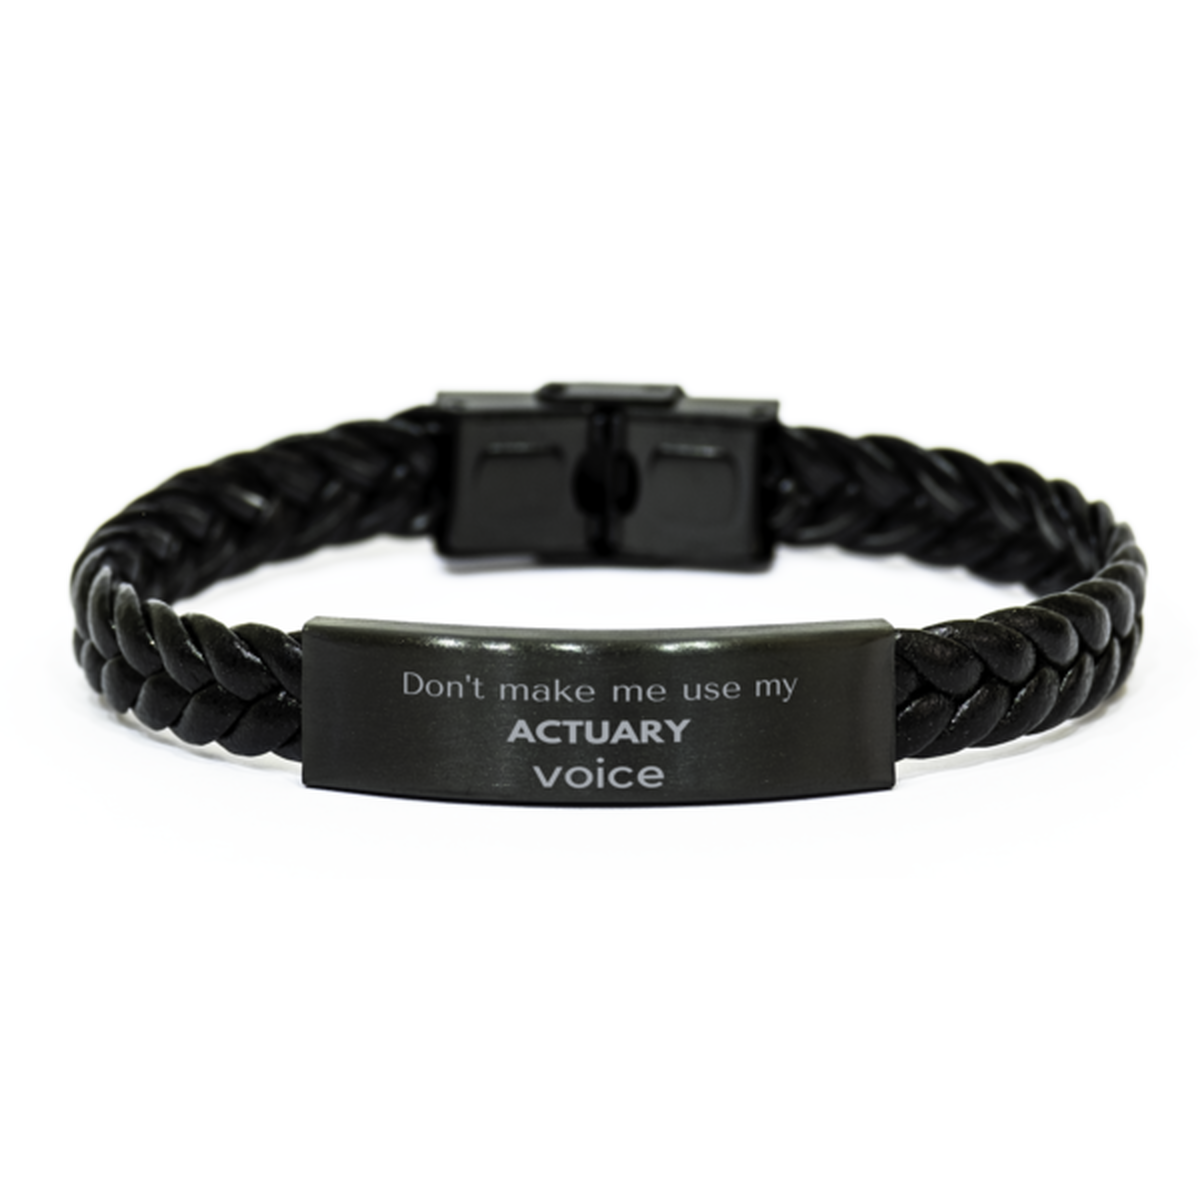 Don't make me use my Actuary voice, Sarcasm Actuary Gifts, Christmas Actuary Braided Leather Bracelet Birthday Unique Gifts For Actuary Coworkers, Men, Women, Colleague, Friends